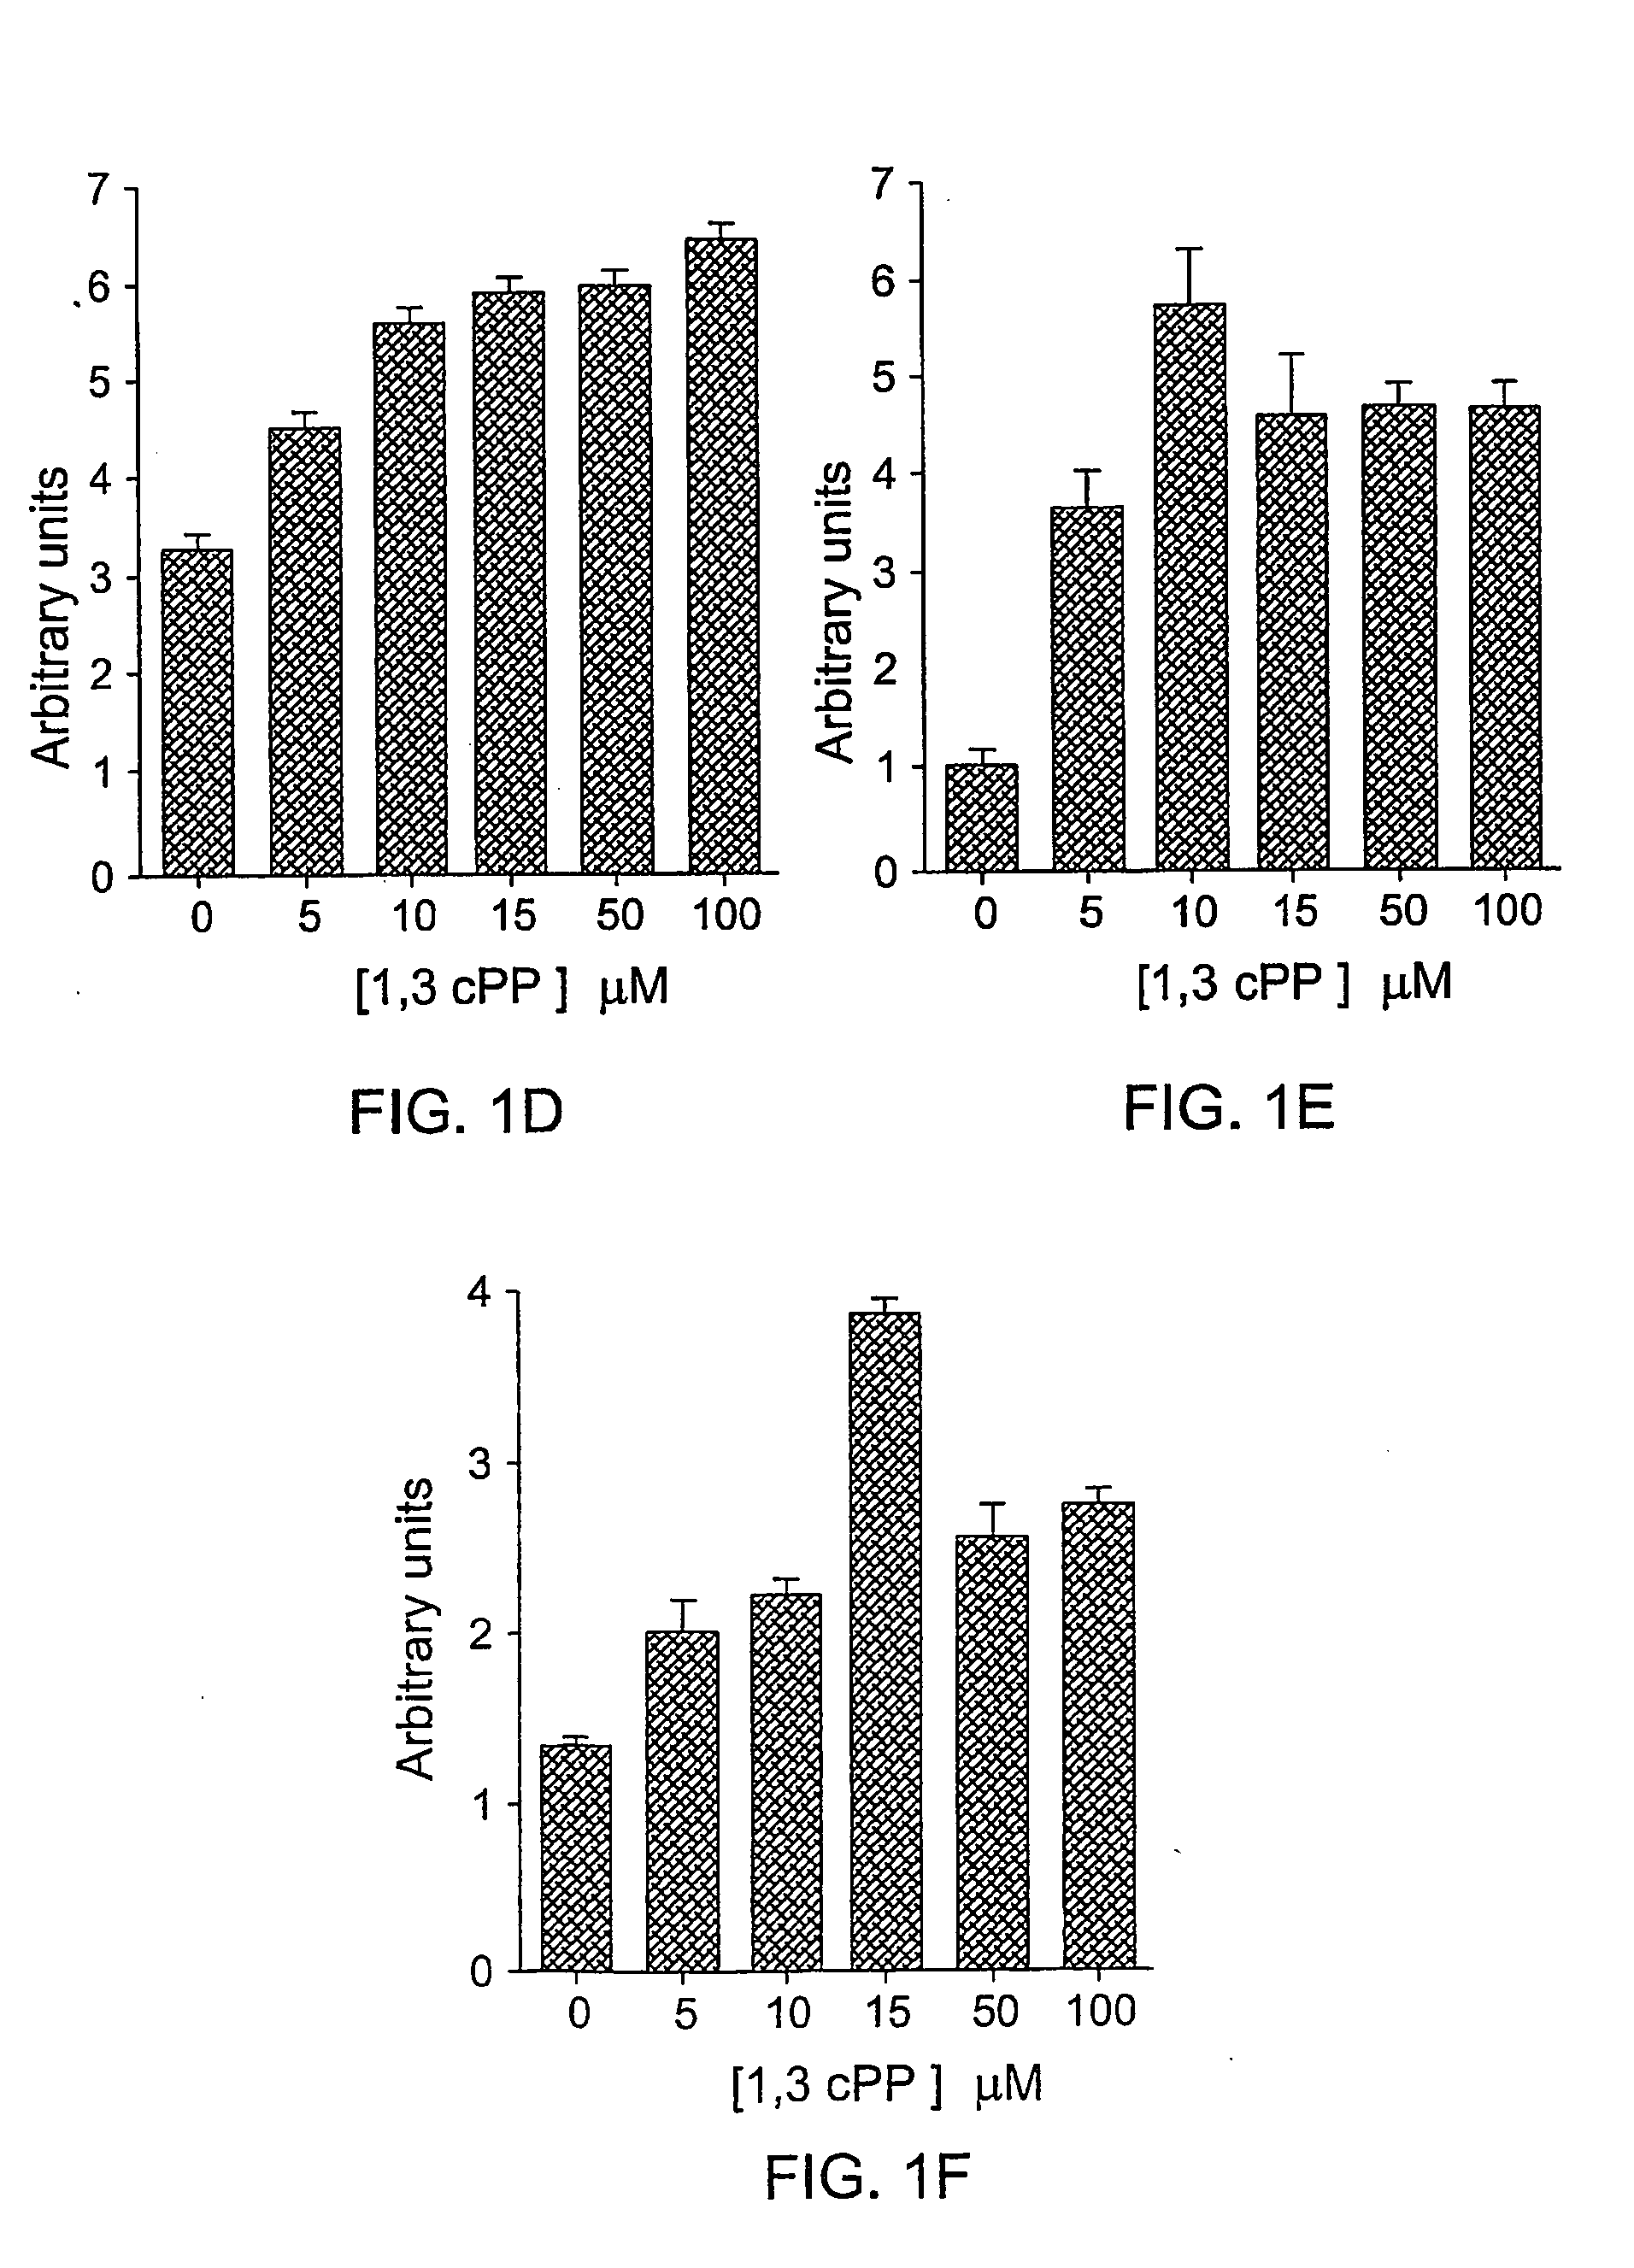 Derivatives of cyclic1, 3- propanediol phosphate and their action in differentiation therapy